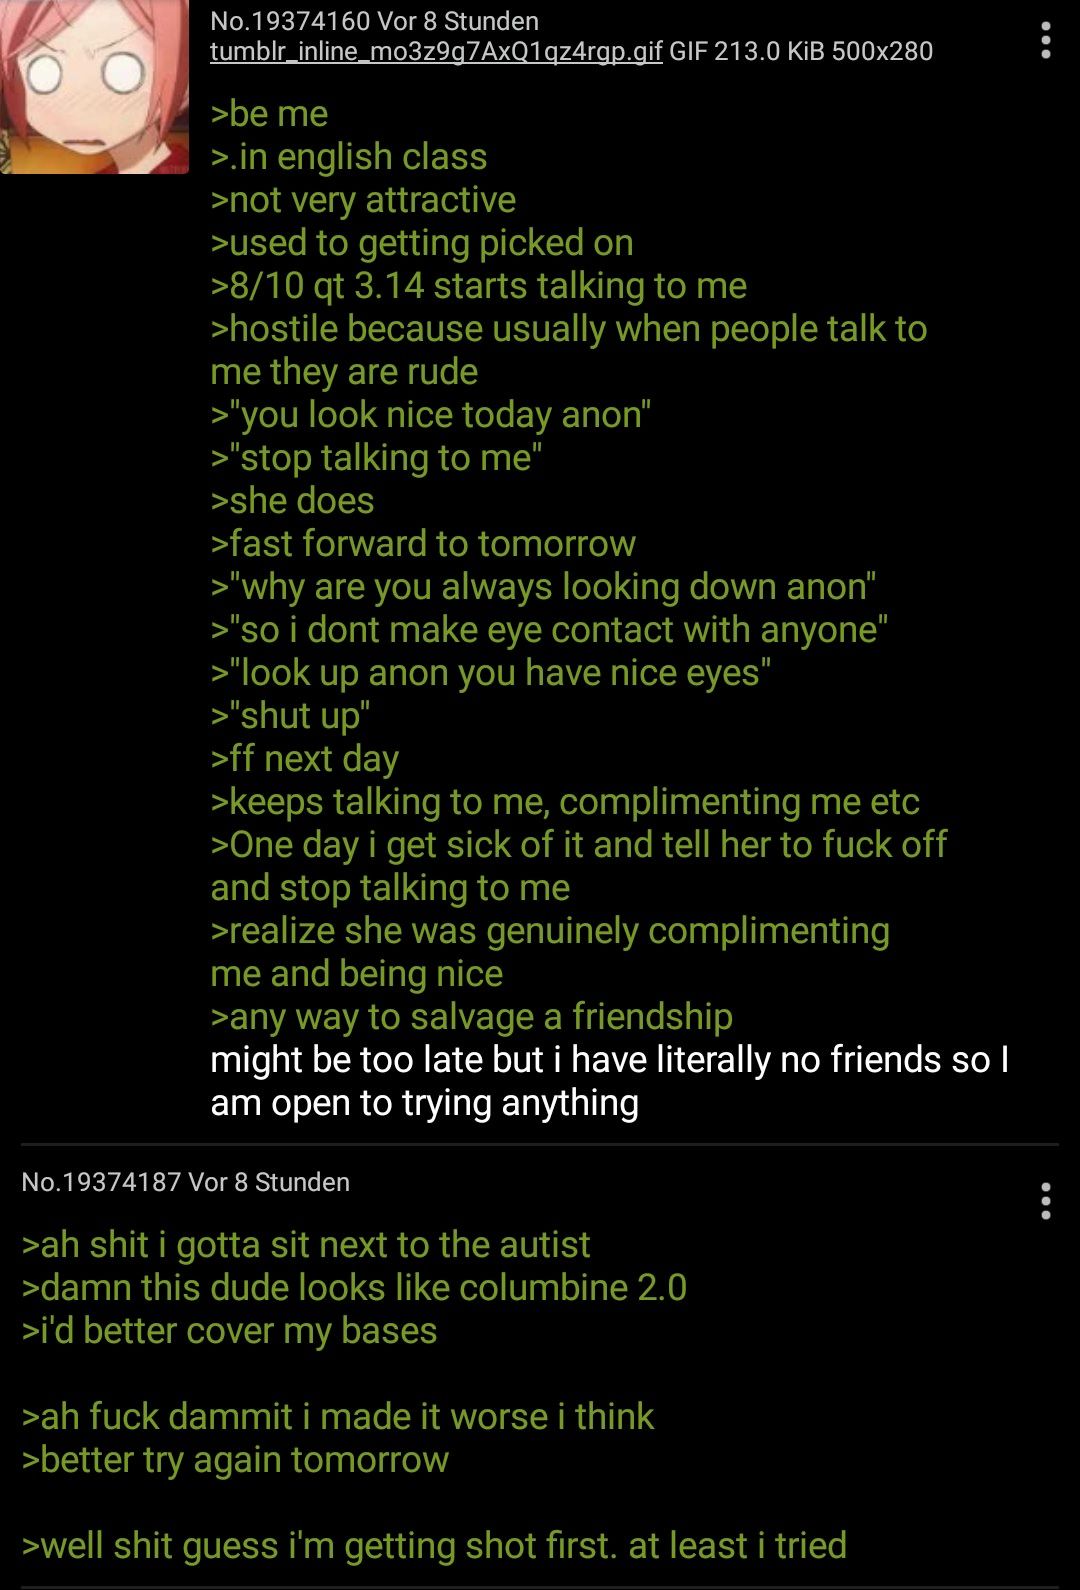 Anon sees the other side of the story